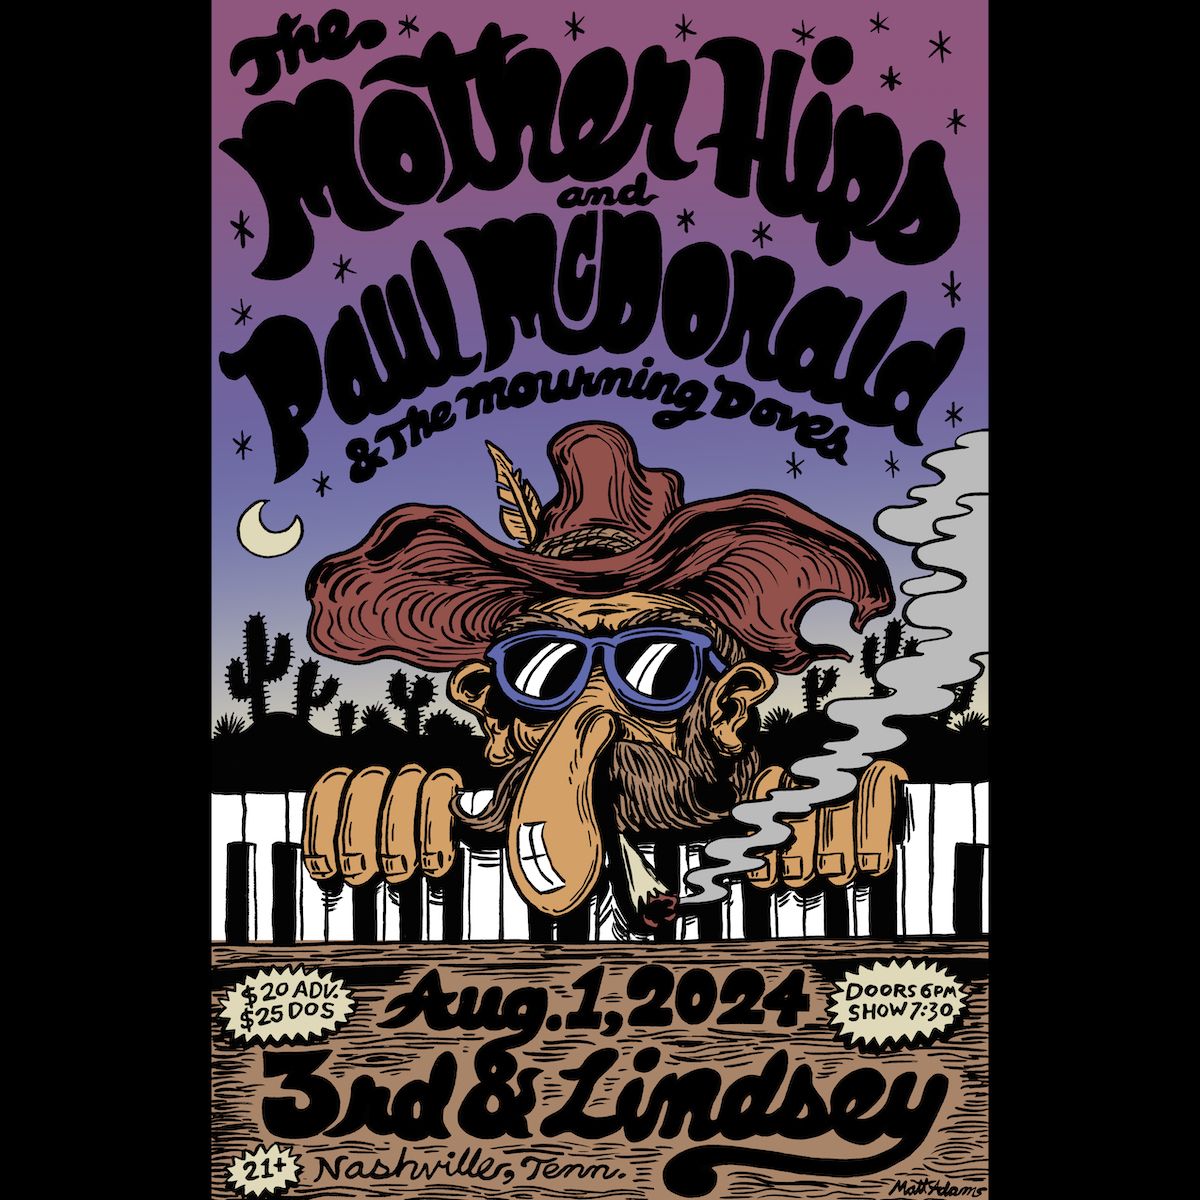 The Mother Hips +  Paul McDonald And The Mourning Doves